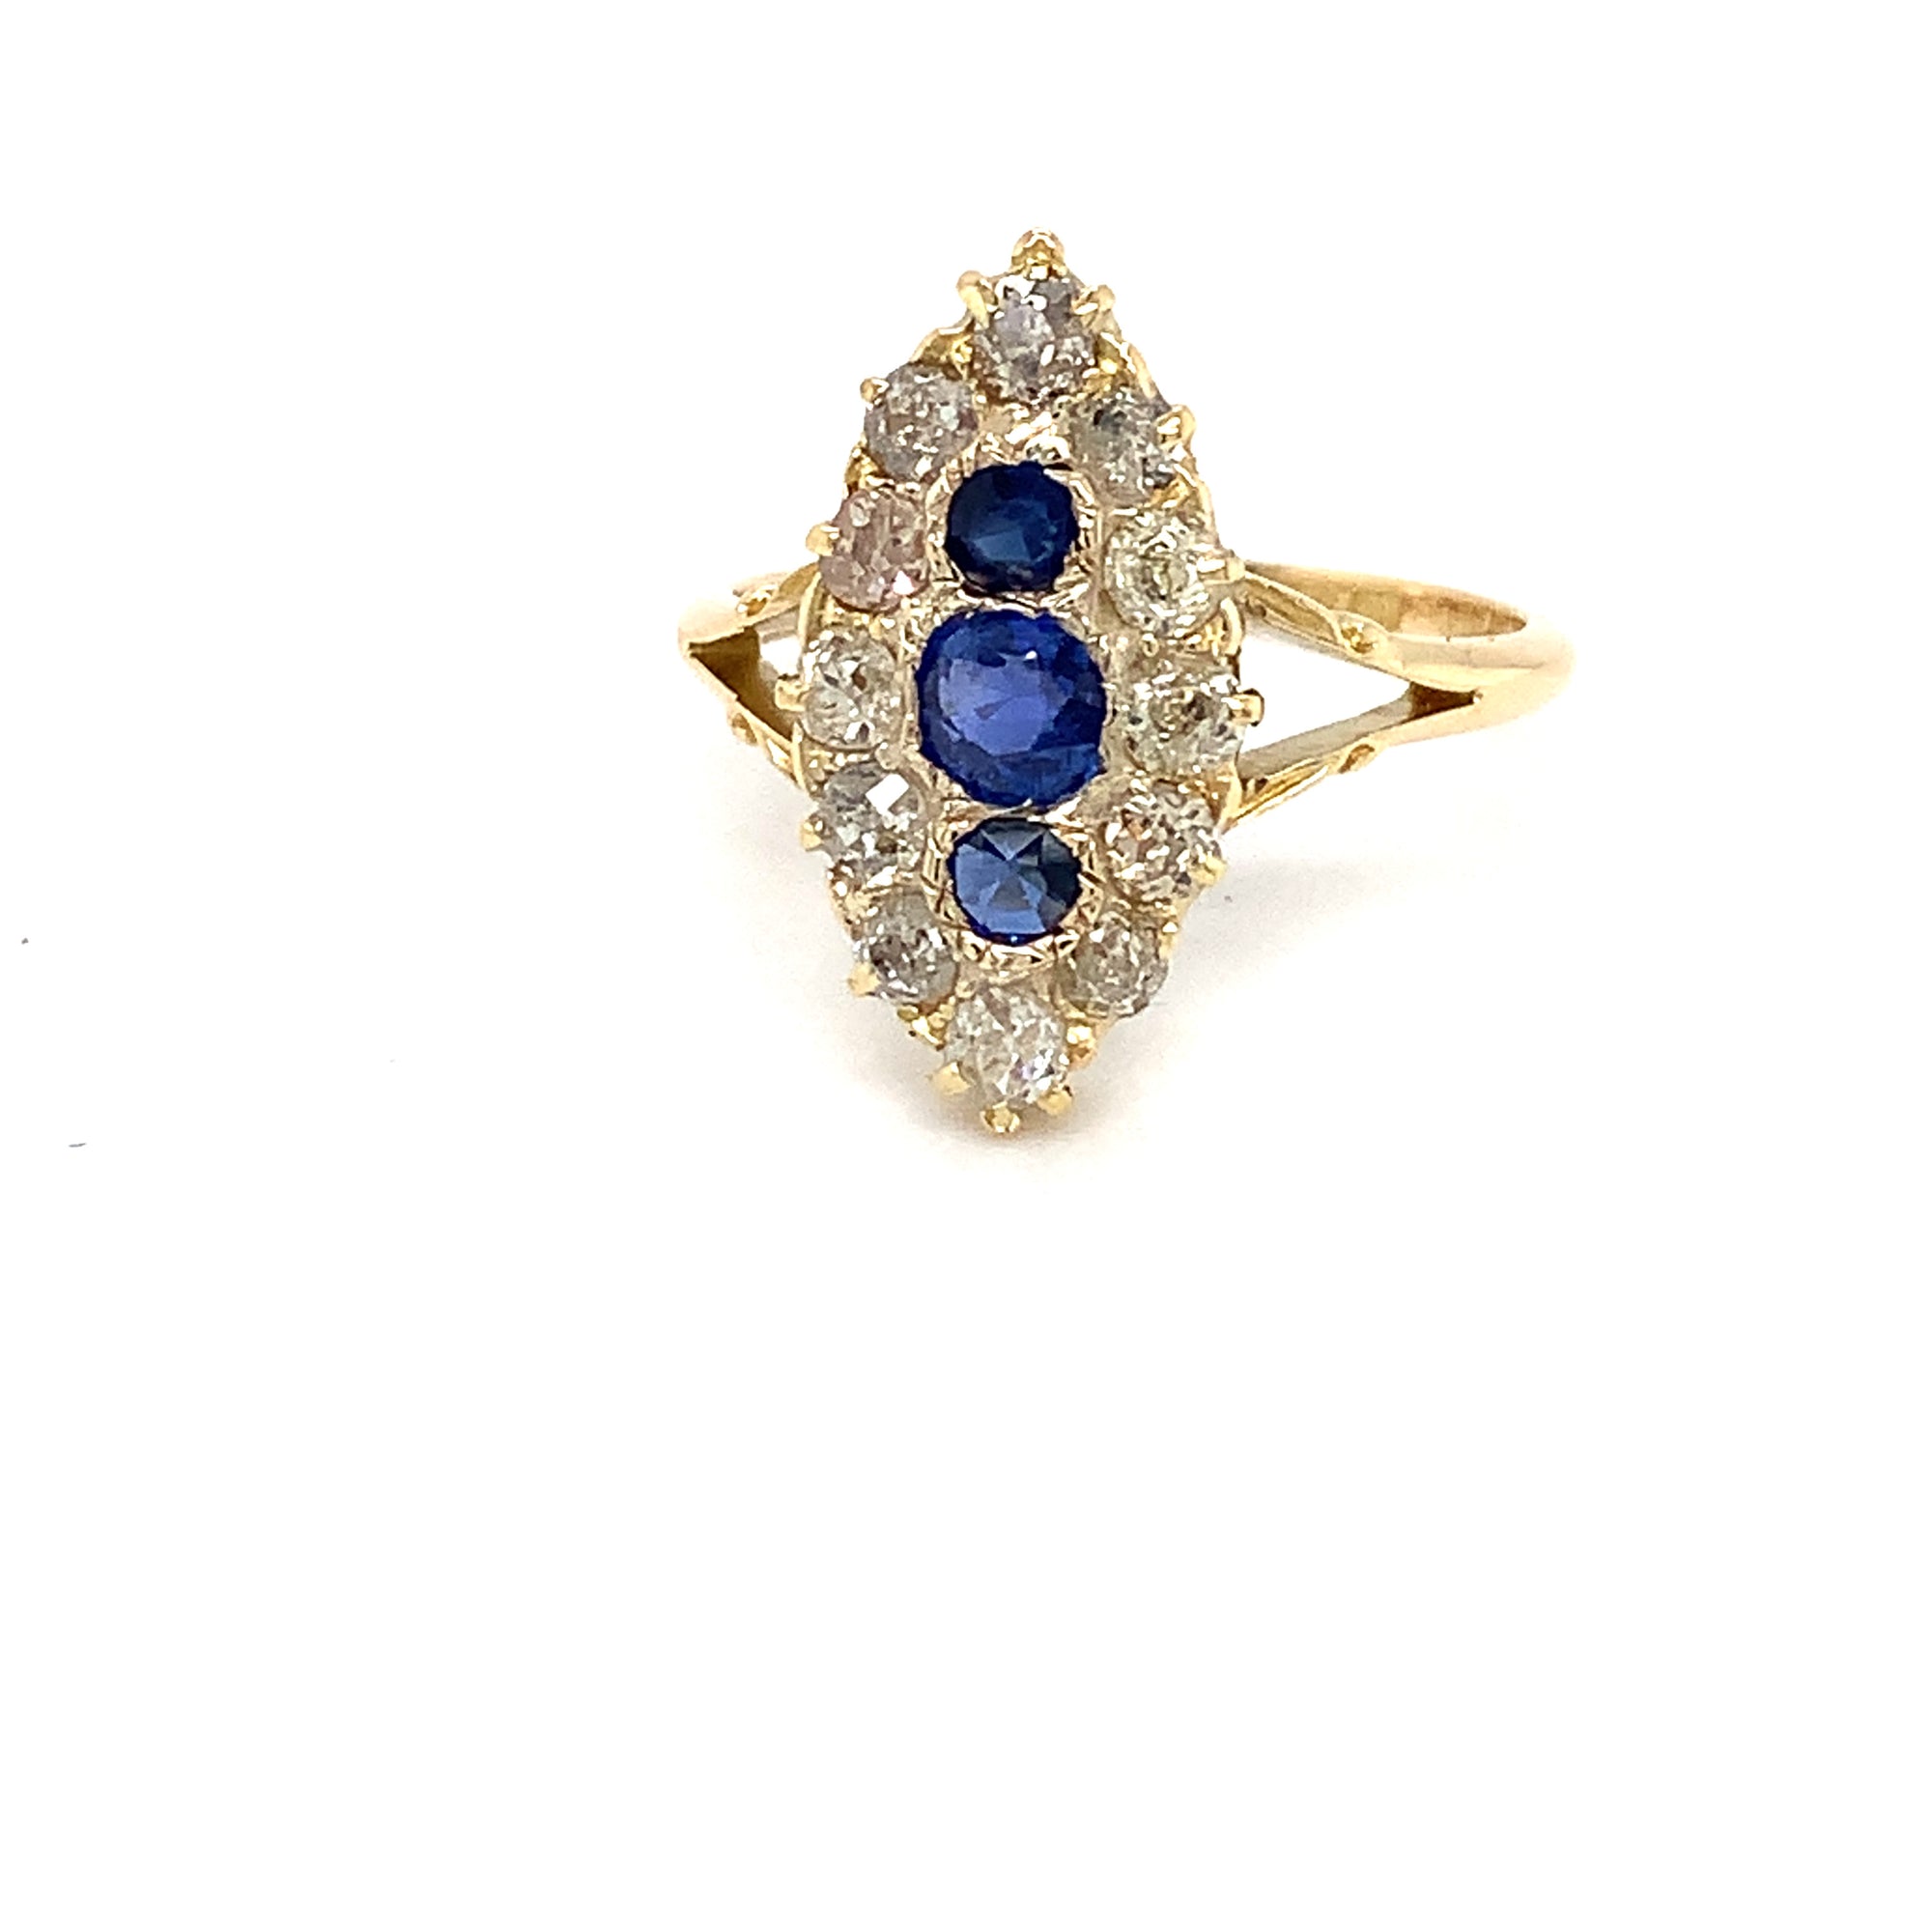 A Victorian Style Blue Sapphire and Diamond Marquise Shaped Cluster Ring.